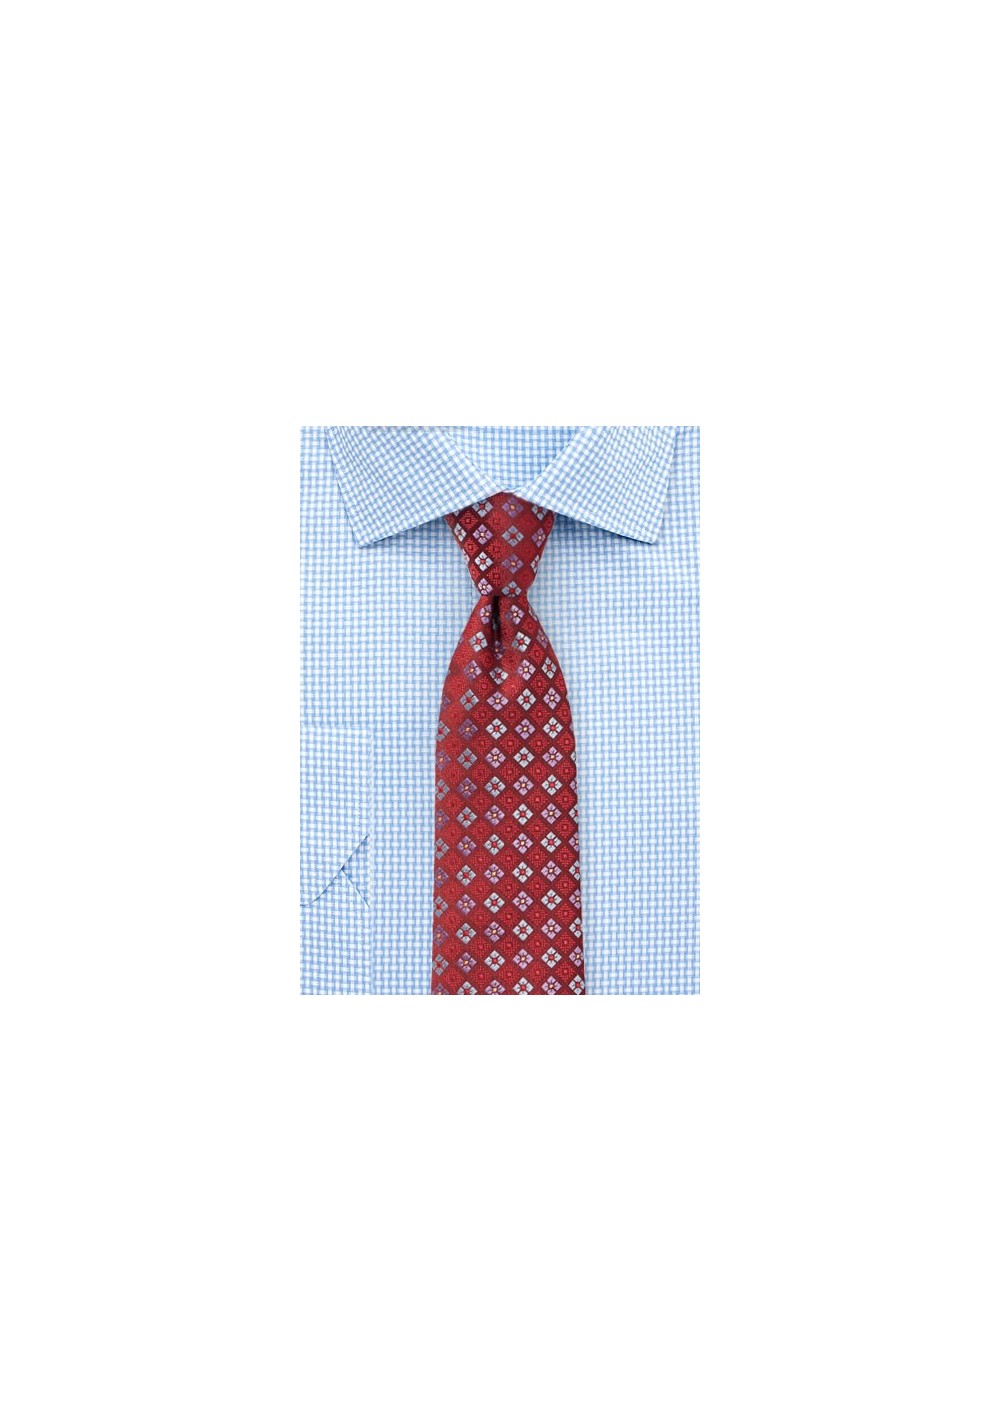 Cherry Red Tie with Florals in Lavender and Sky Blue